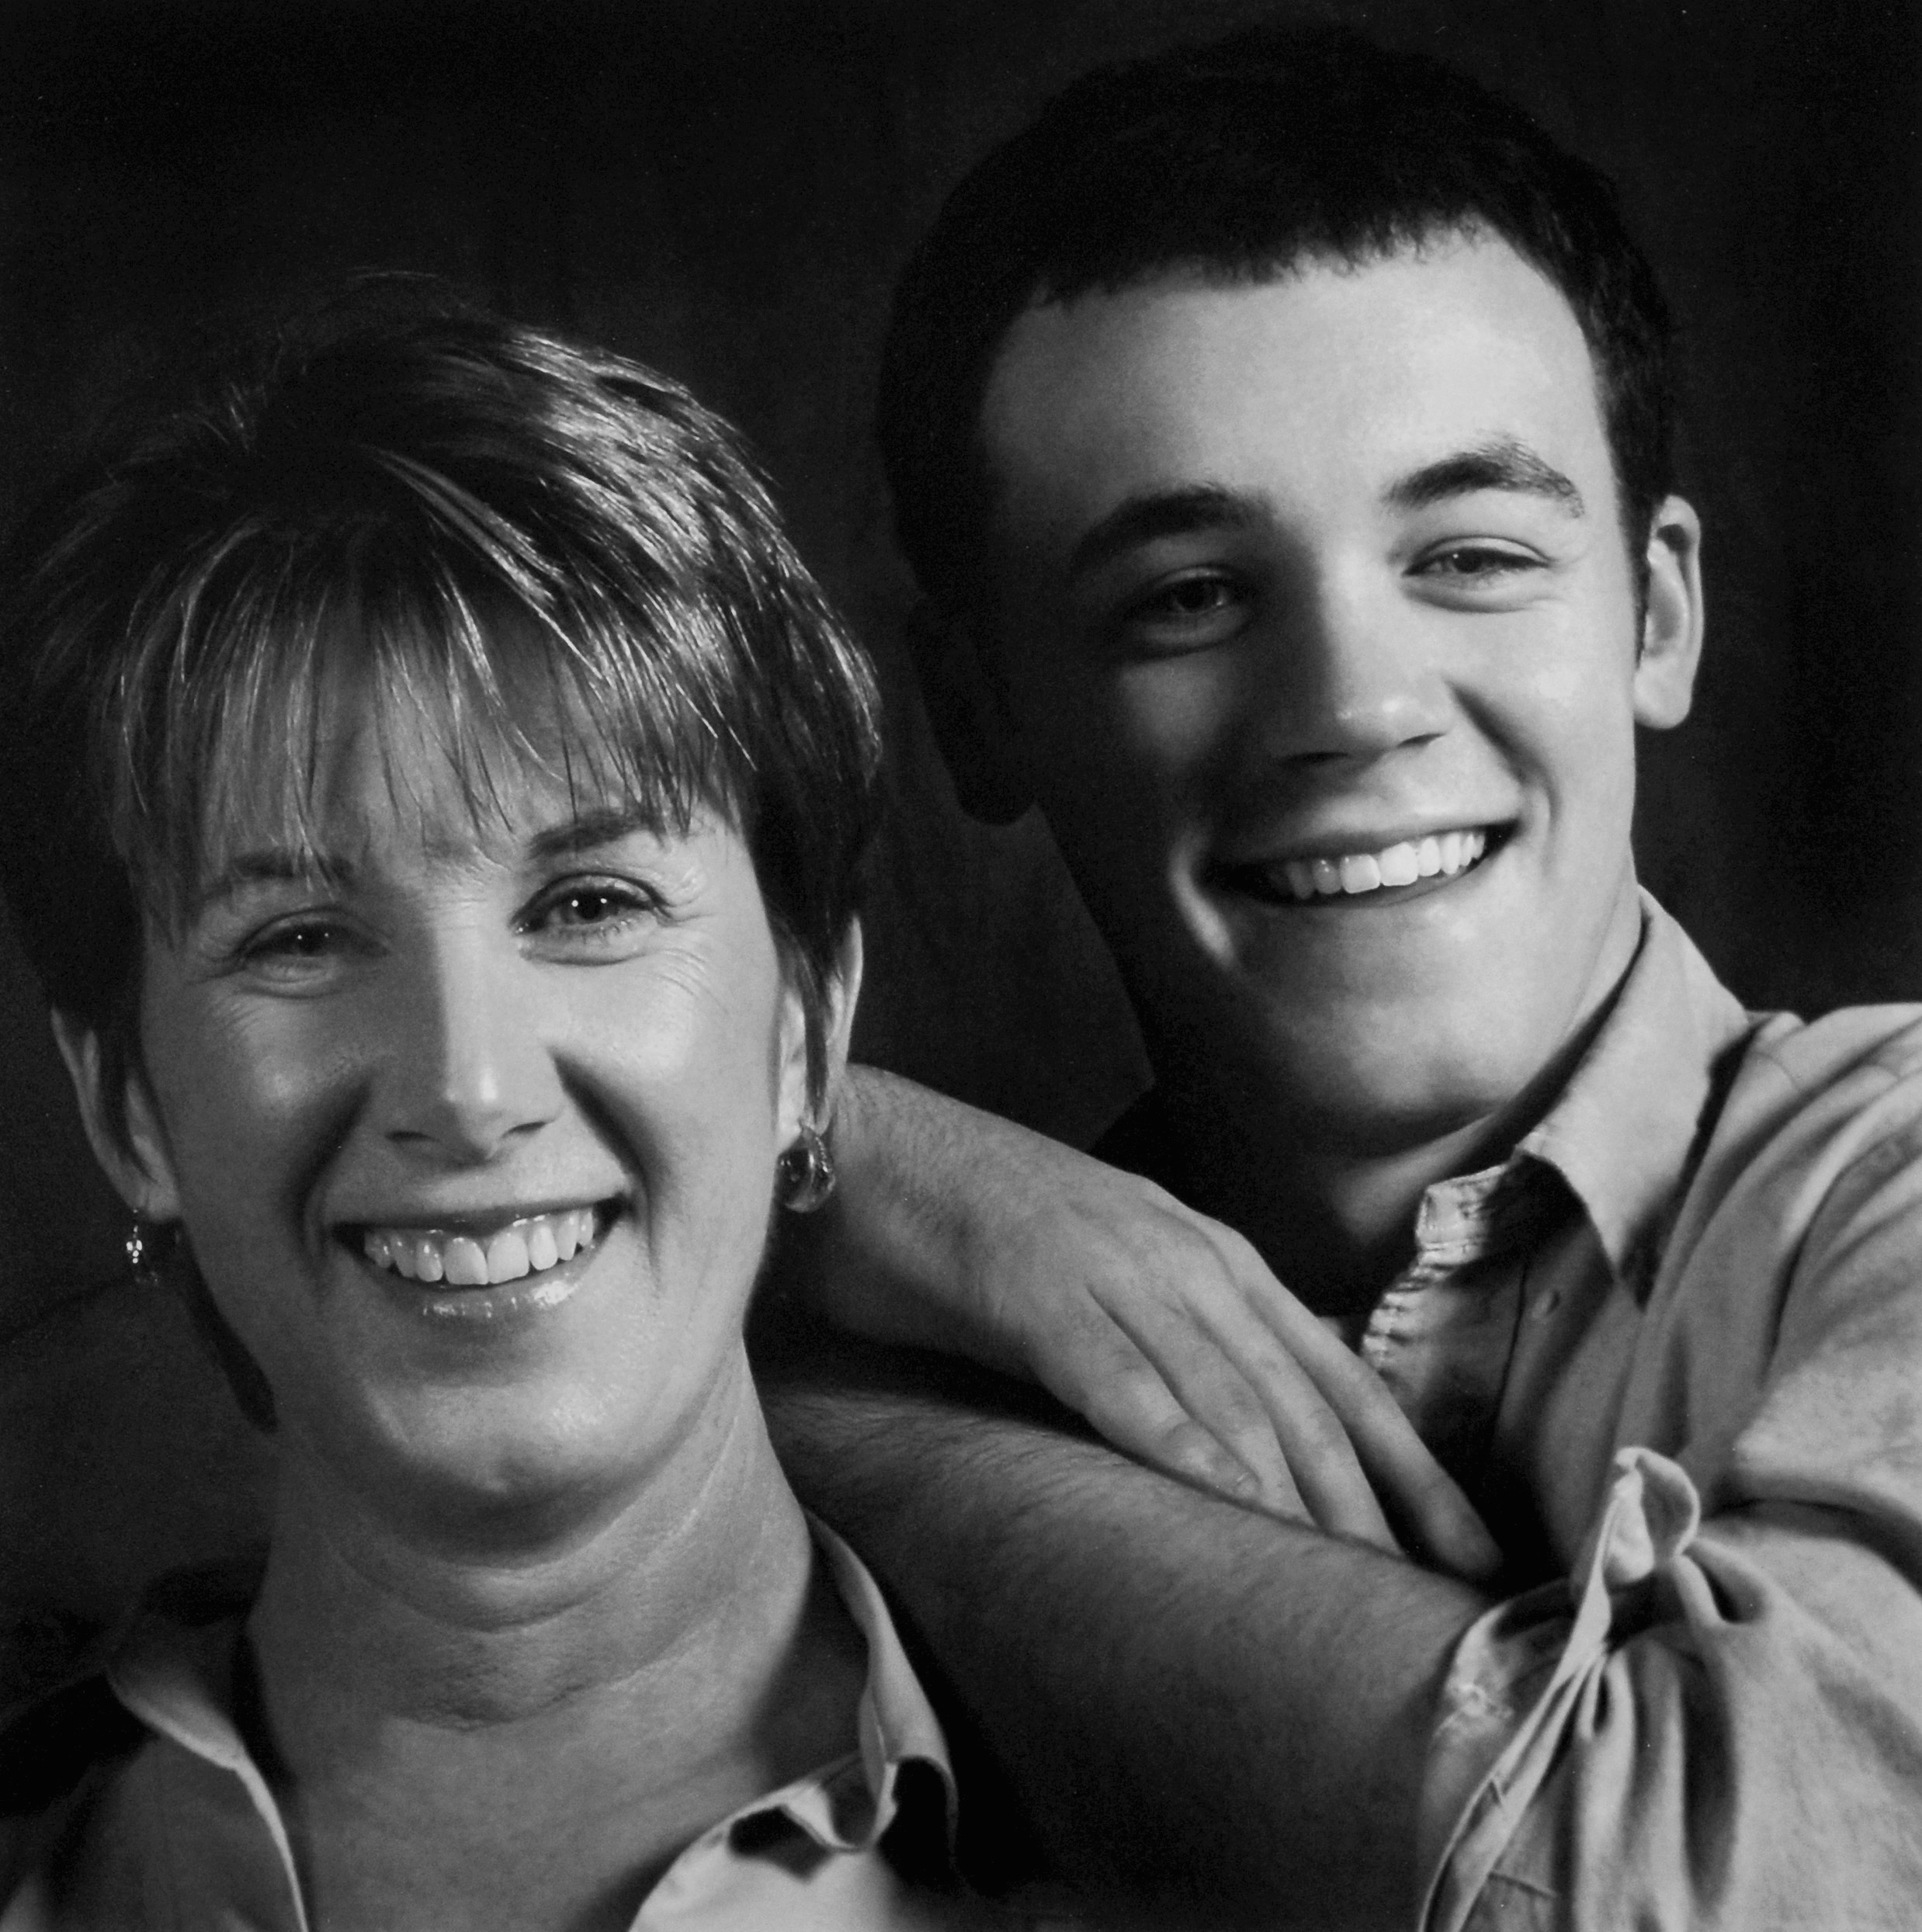  Dr. Sharon Parsons with her son Sean Herman